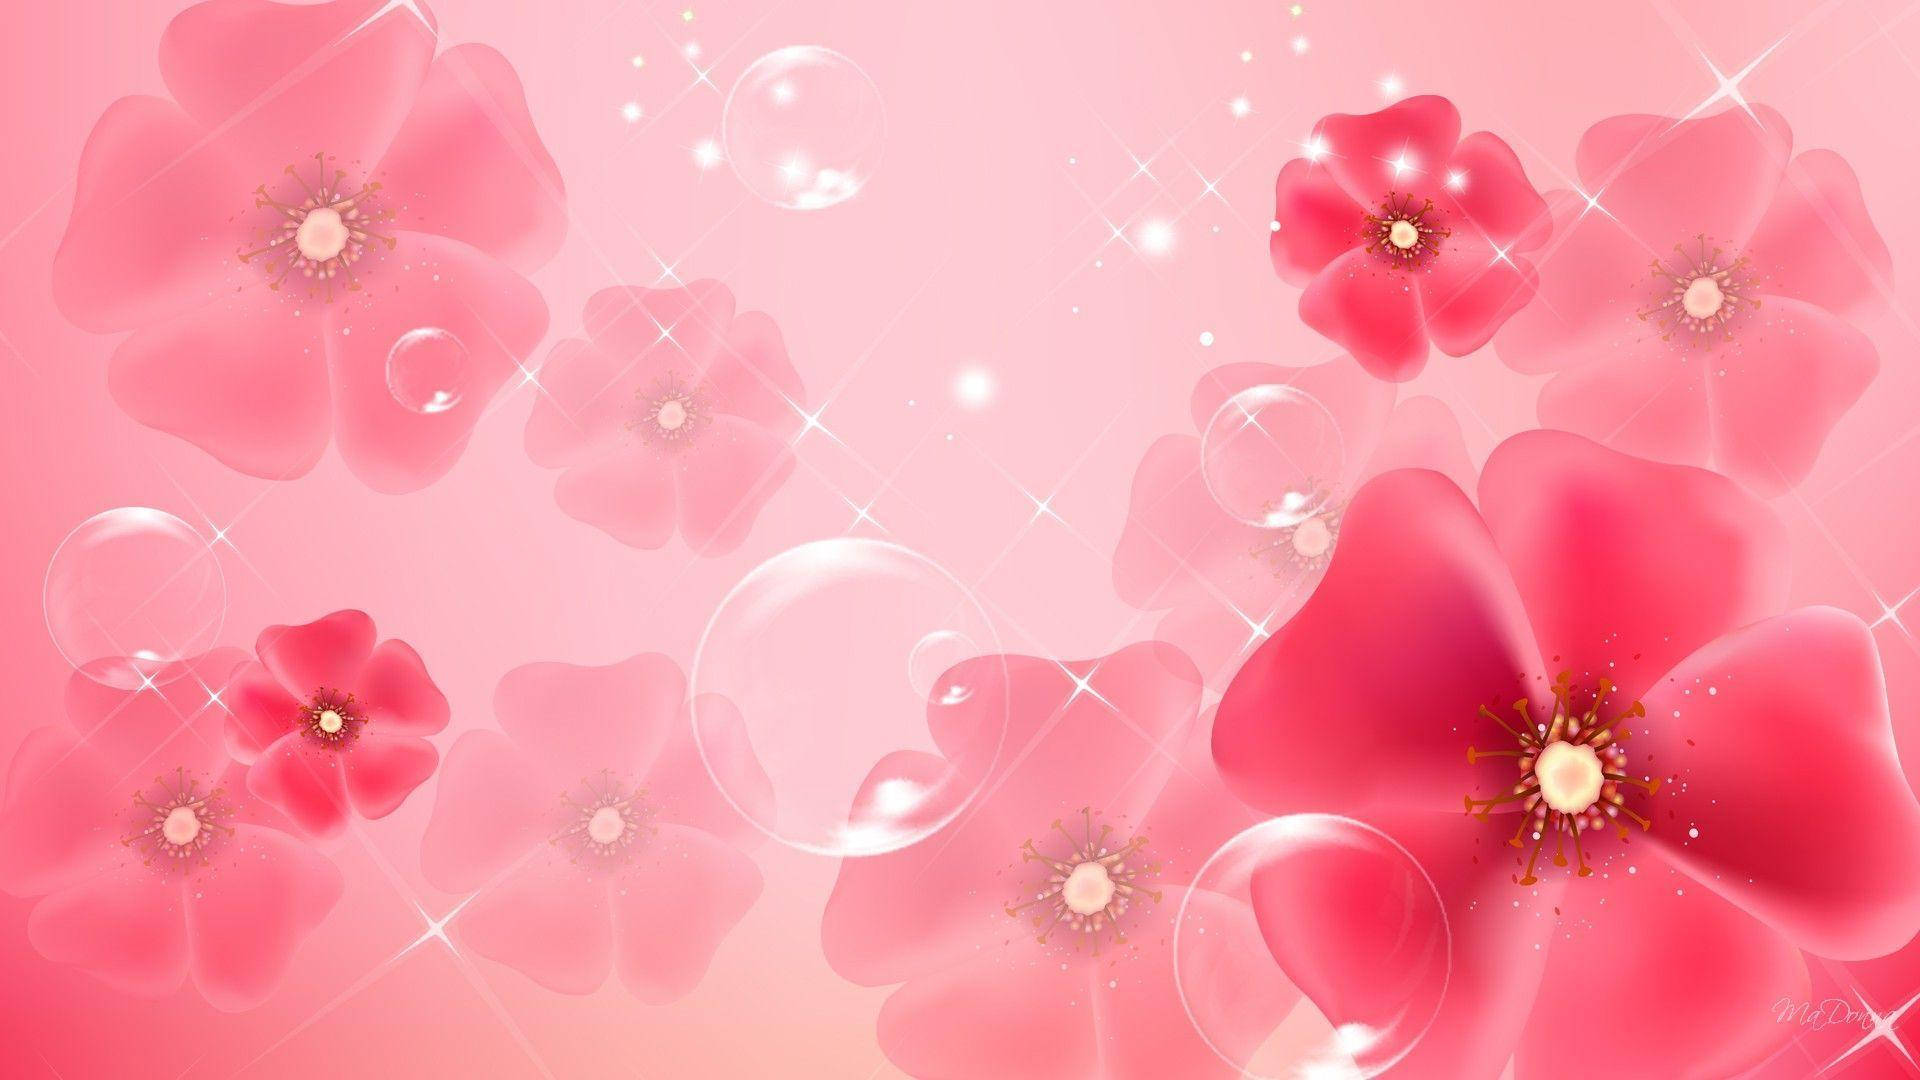 Light Pink Flowers And Bubbles Background